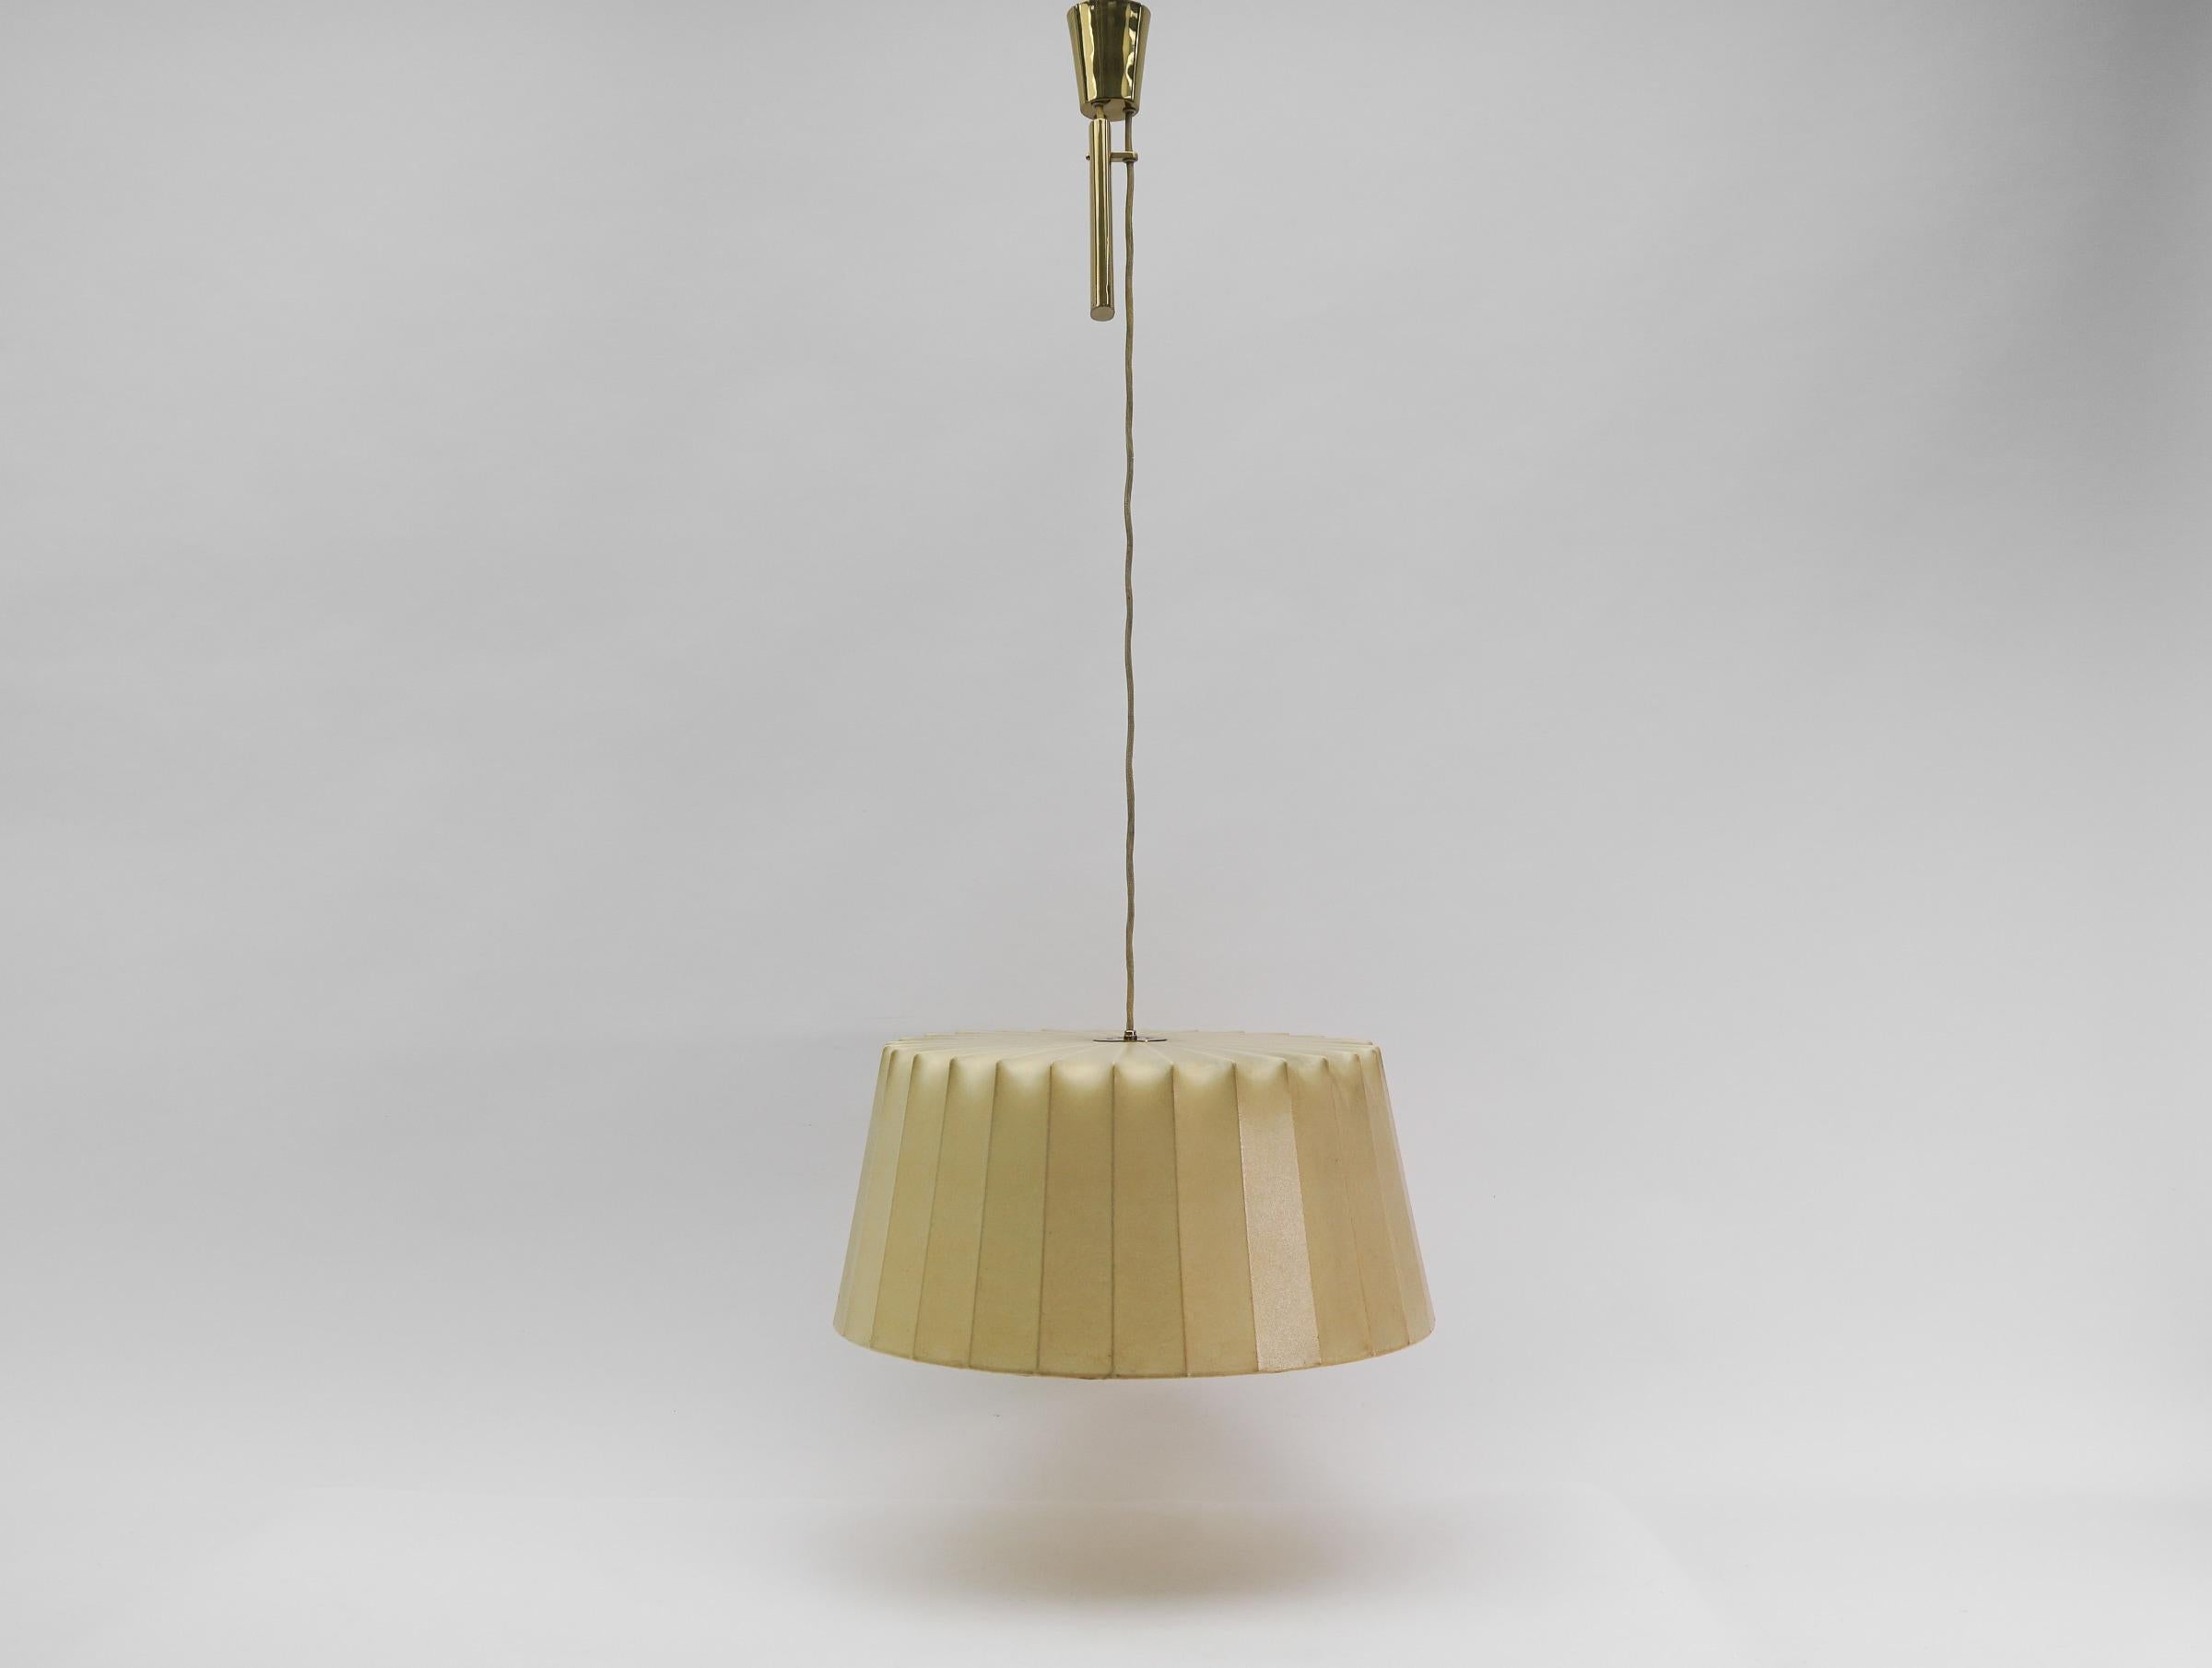 Lovely Cocoon Counterweight Hanging Lamp by Münchener Werkstätten, 1950s Germany In Good Condition For Sale In Nürnberg, Bayern